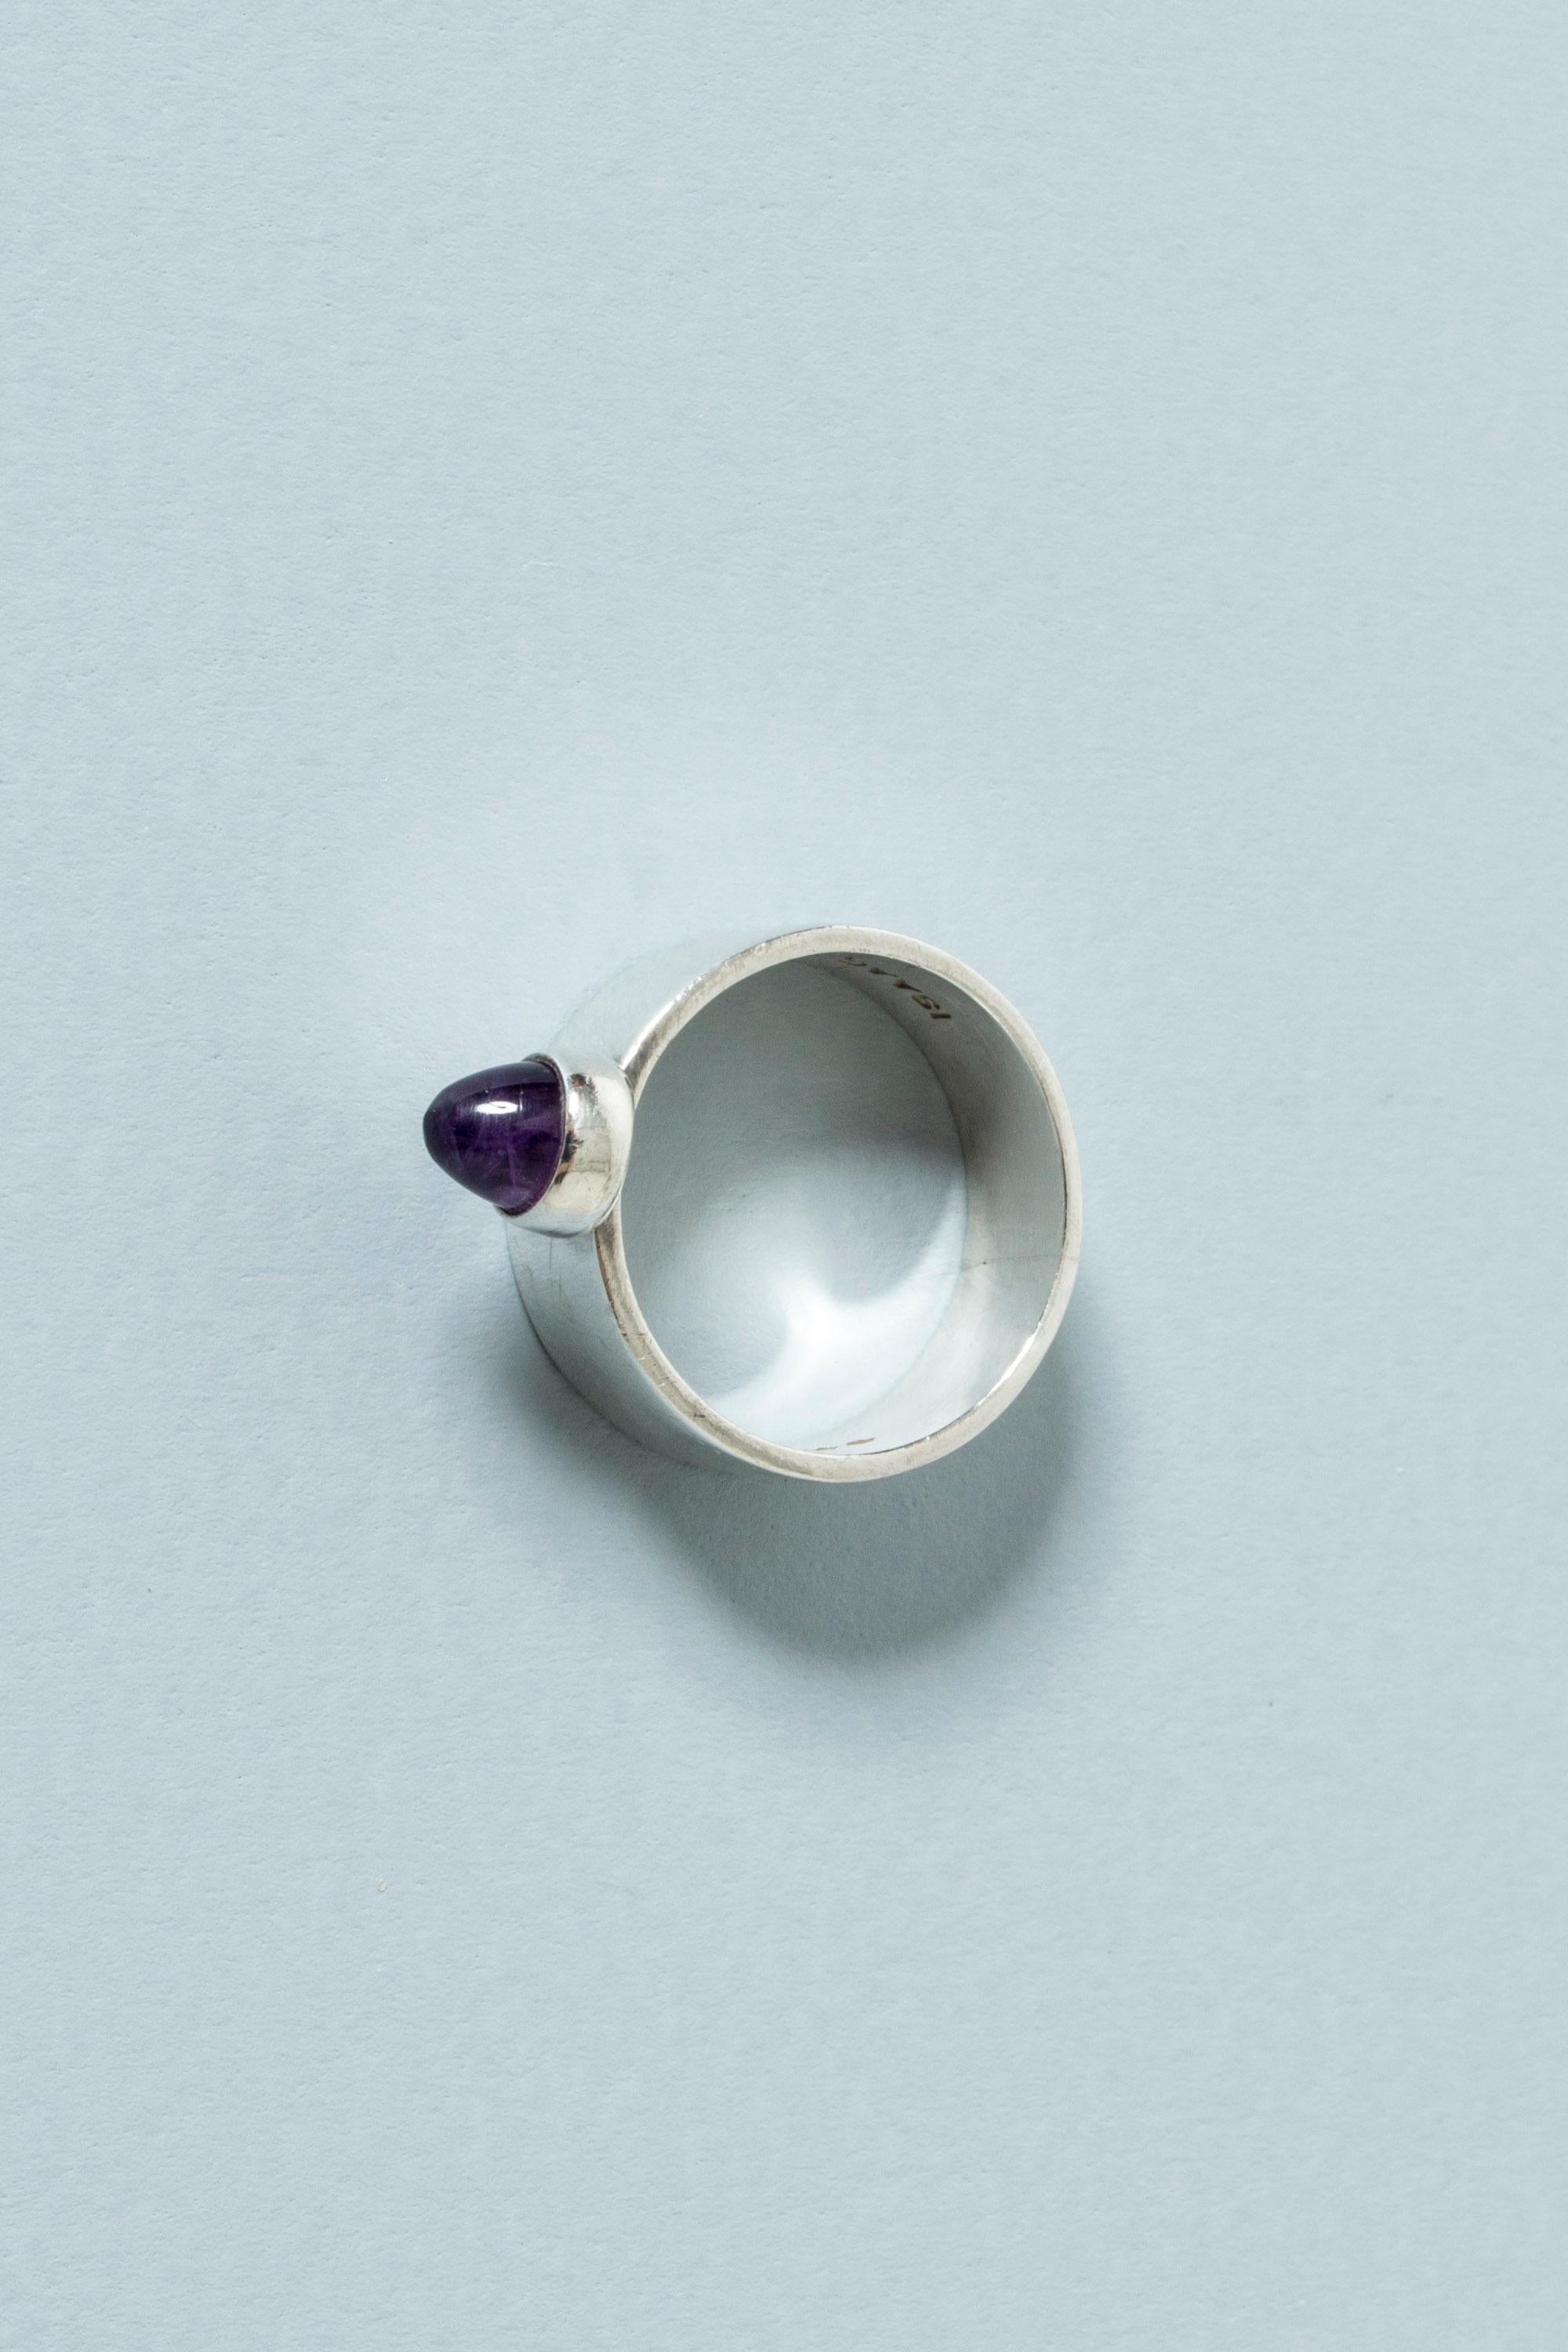 Bullet Cut Silver and Amethyst Ring by Isaac Cohen, Sweden, 1967